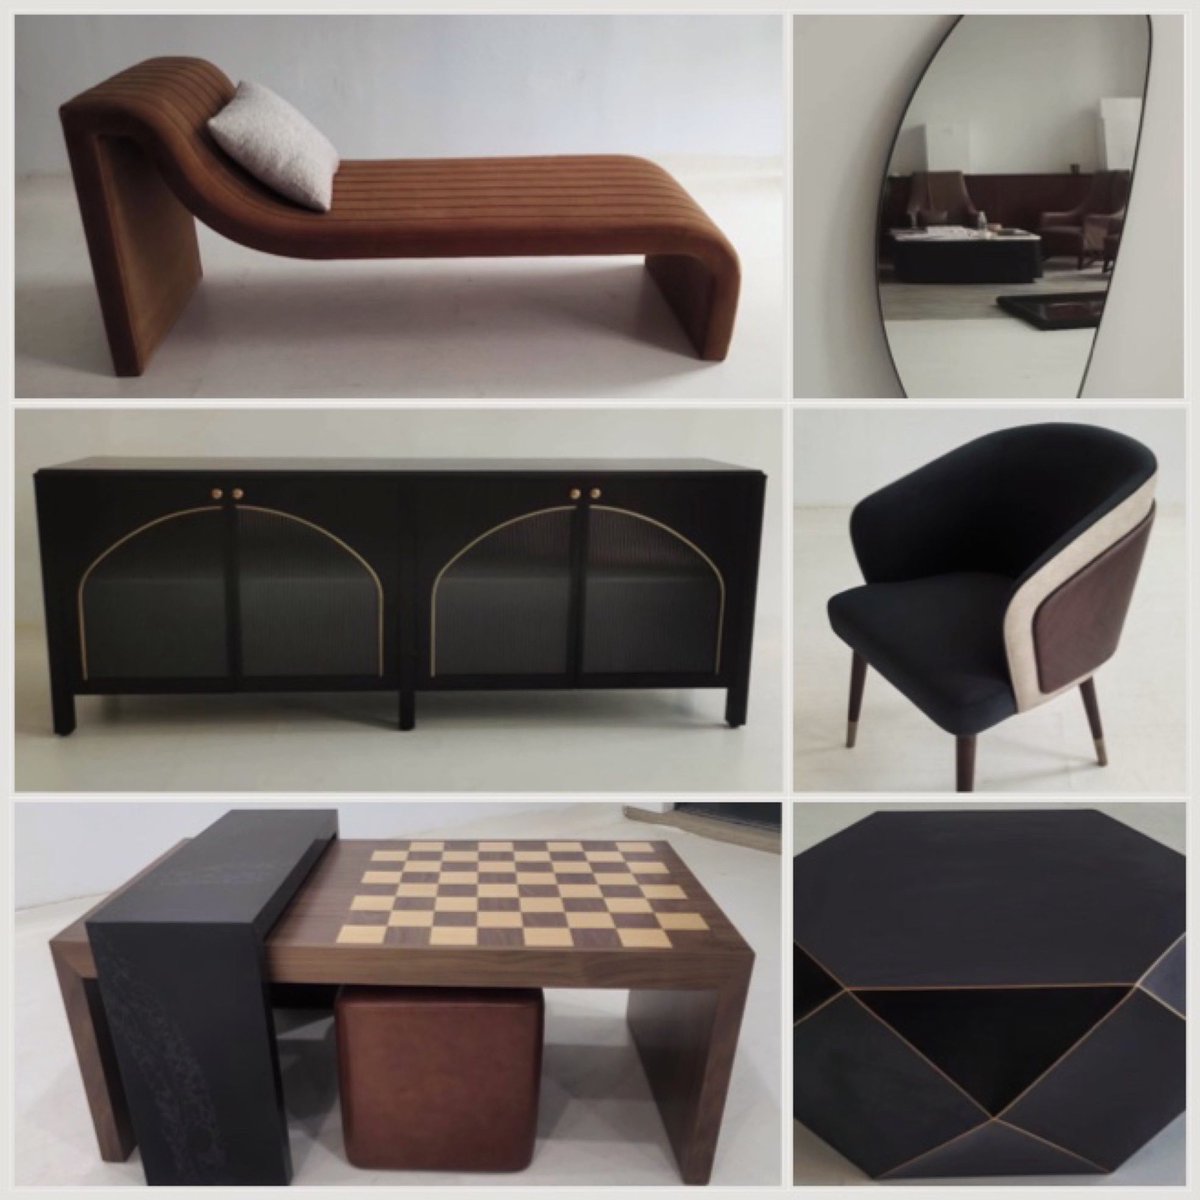 Some of our unique pieces headed to @tempobyhilton. #raleigh 

#supplier #chaiselounge #casegood #cocktailtable #table #mirror #loungechair #endtable #furniture #custom #wecreatehospitality #design #interiors #decor #interiordecor #hospitality #hotelfurniture #hospitalityindustry